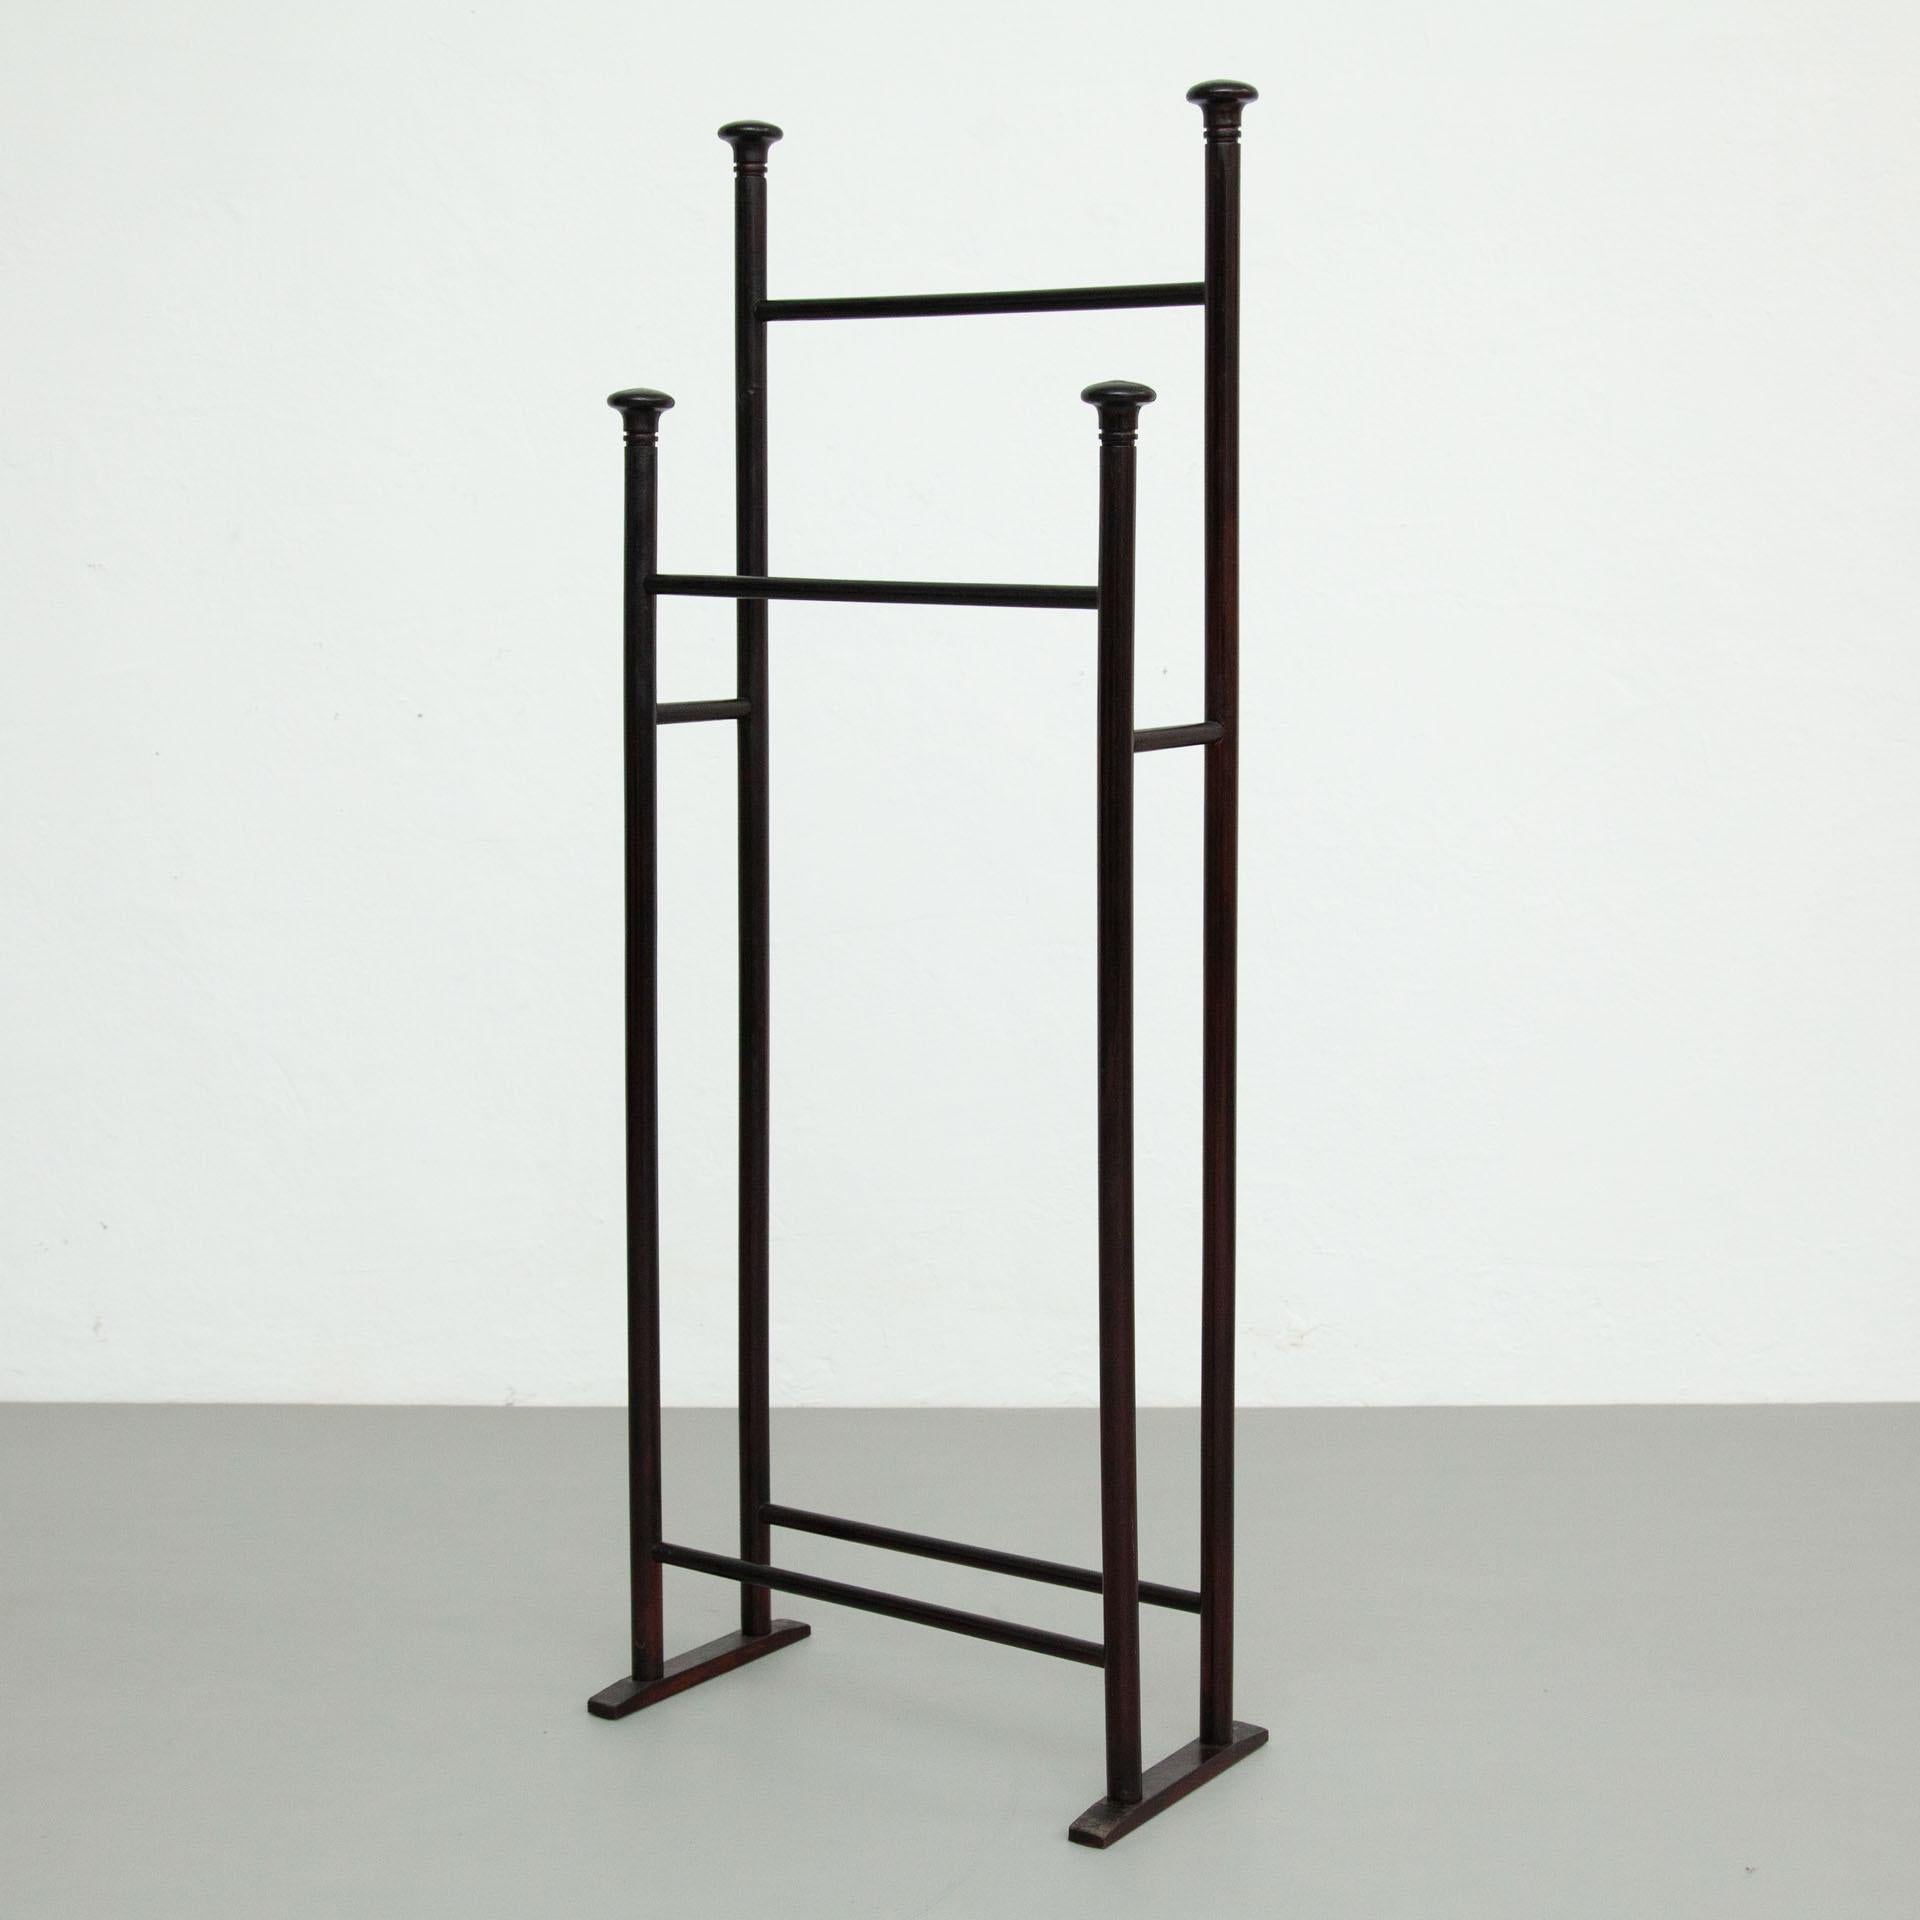 Galant is a free-standing and portable valet stand or towel horse designed by Pep Bonet and manufactured by BD Barcelona, circa 1980.

Material:
Wood

Dimensions:
D 23 cm x W 45 cm x H 118 cm

Pep Bonet Bertran was born in Barcelona in